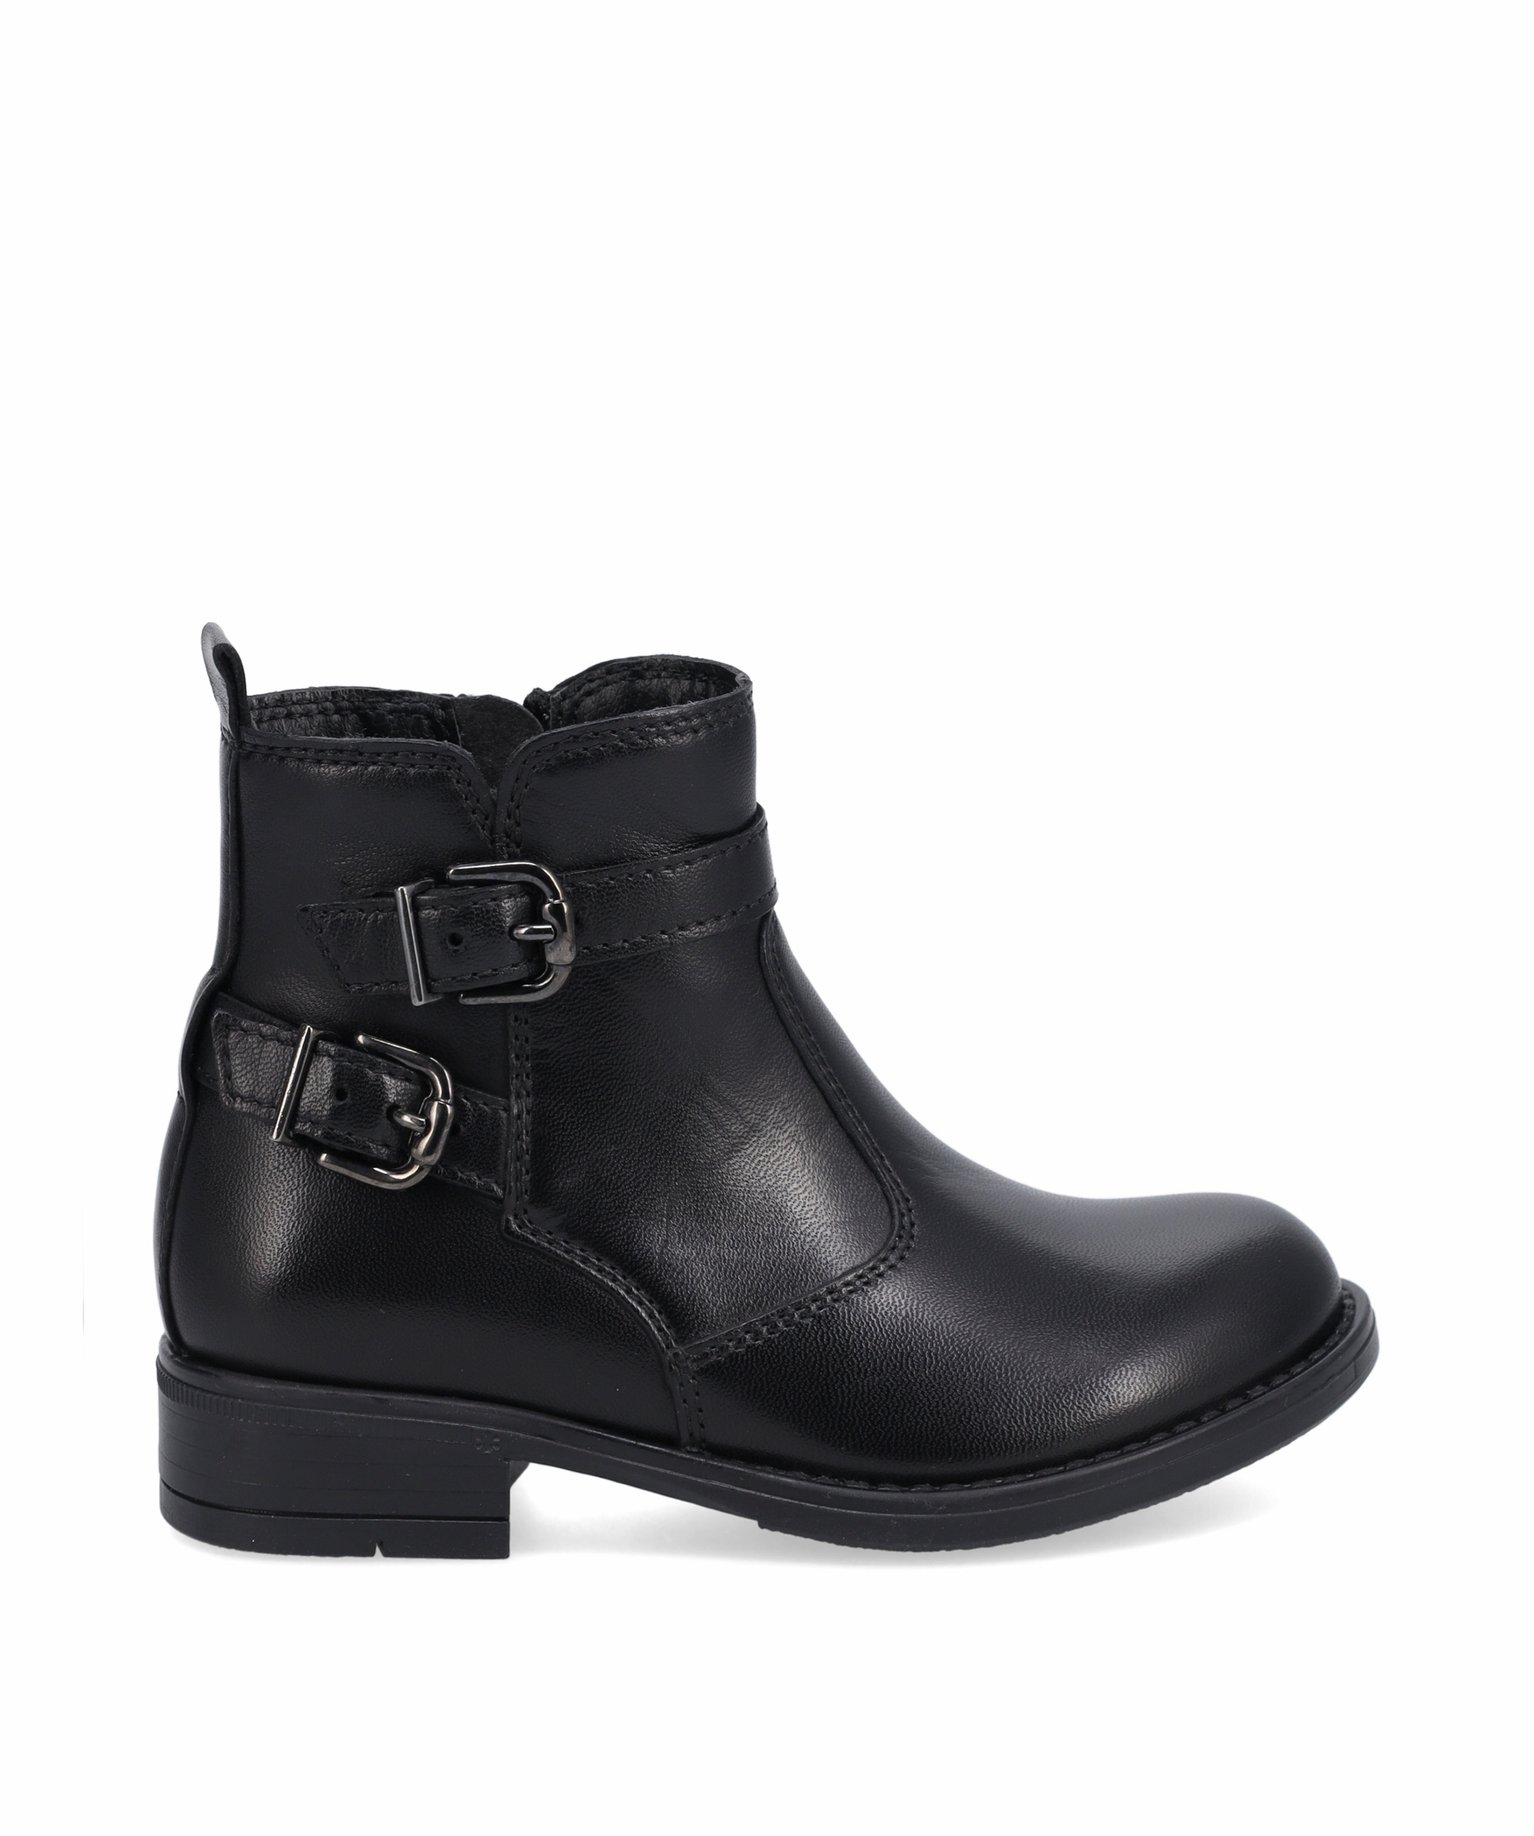 boots fille unies style cavaliere dessus cuir - taneo noir